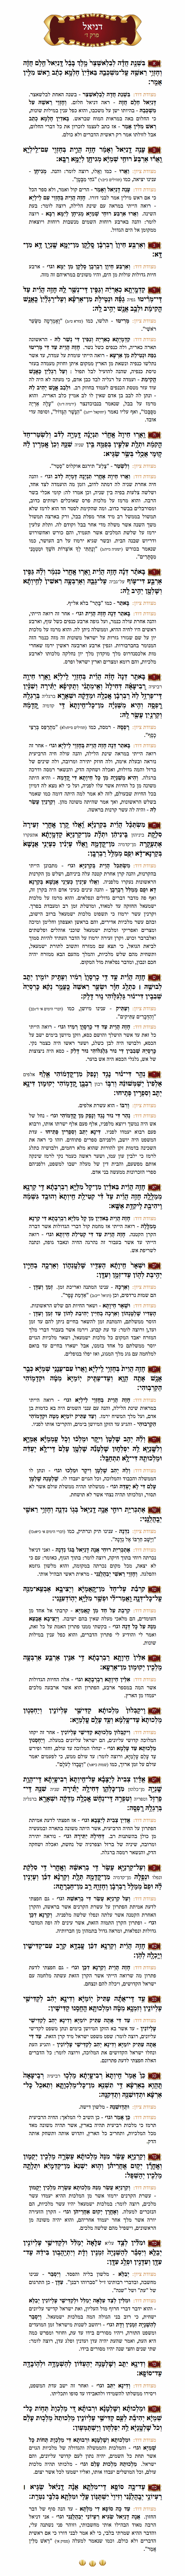 Sefer Daniel Chapter 7 with commentary